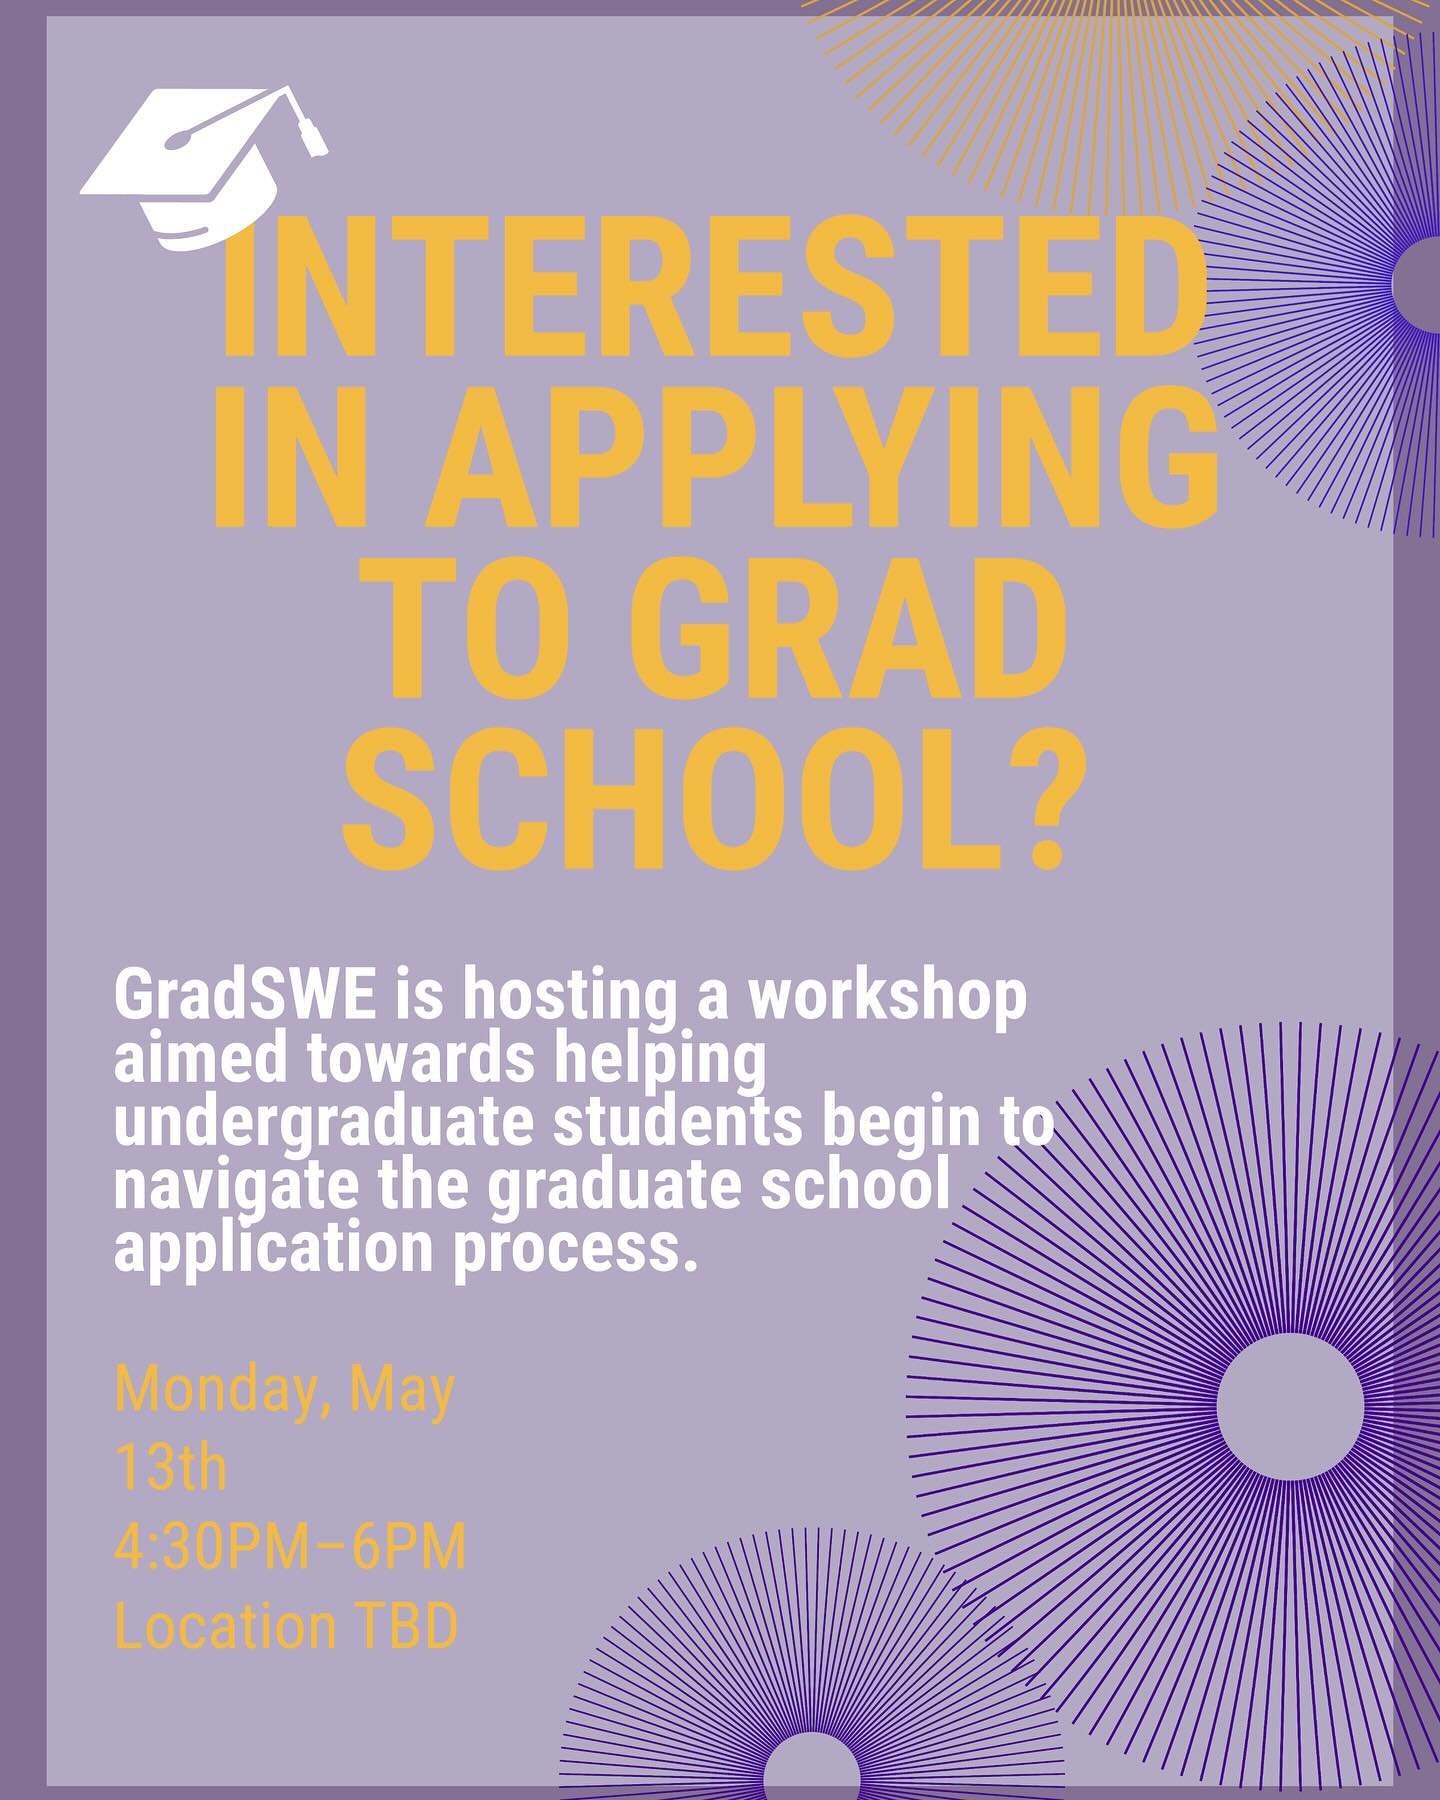 Are you considering applying to graduate school? Do you want to learn about choosing which programs to apply to and how to prepare for the application process? Join us for our &ldquo;Applying to Graduate School Workshop&rdquo; event on May 13th from 